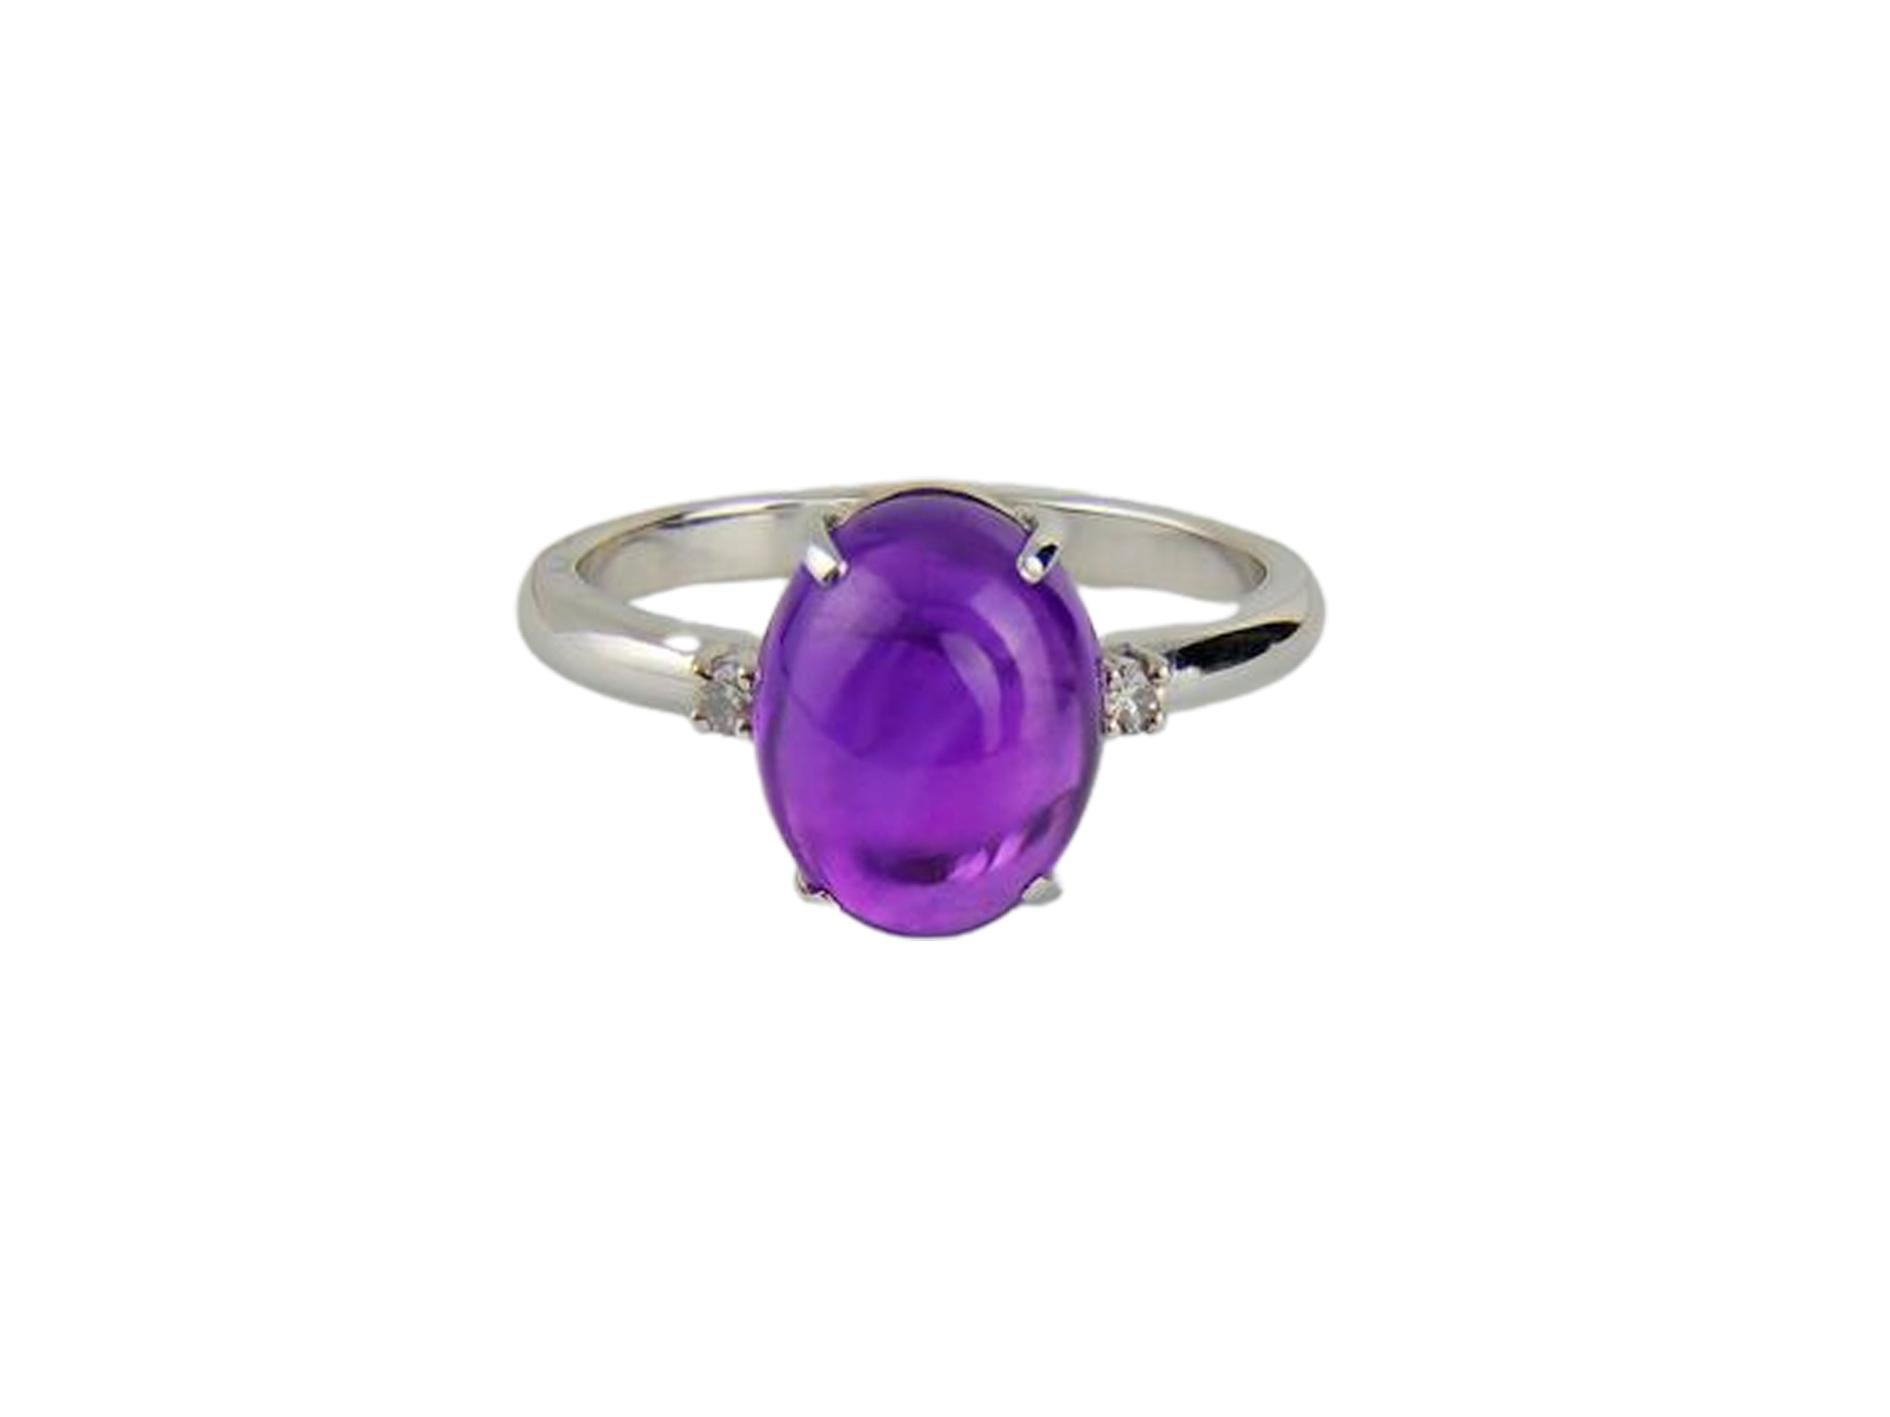 Minimalism style white gold ring with natural amethyst cabochon and diamonds. Are hand made item. 
Weight approx. 4.1 g 

Set with amethyst.
4.79 ct. oval cabochon cut amethyst. 
Colour: Purple
Clarity: Transparent

Surrounding stone - Diamonds